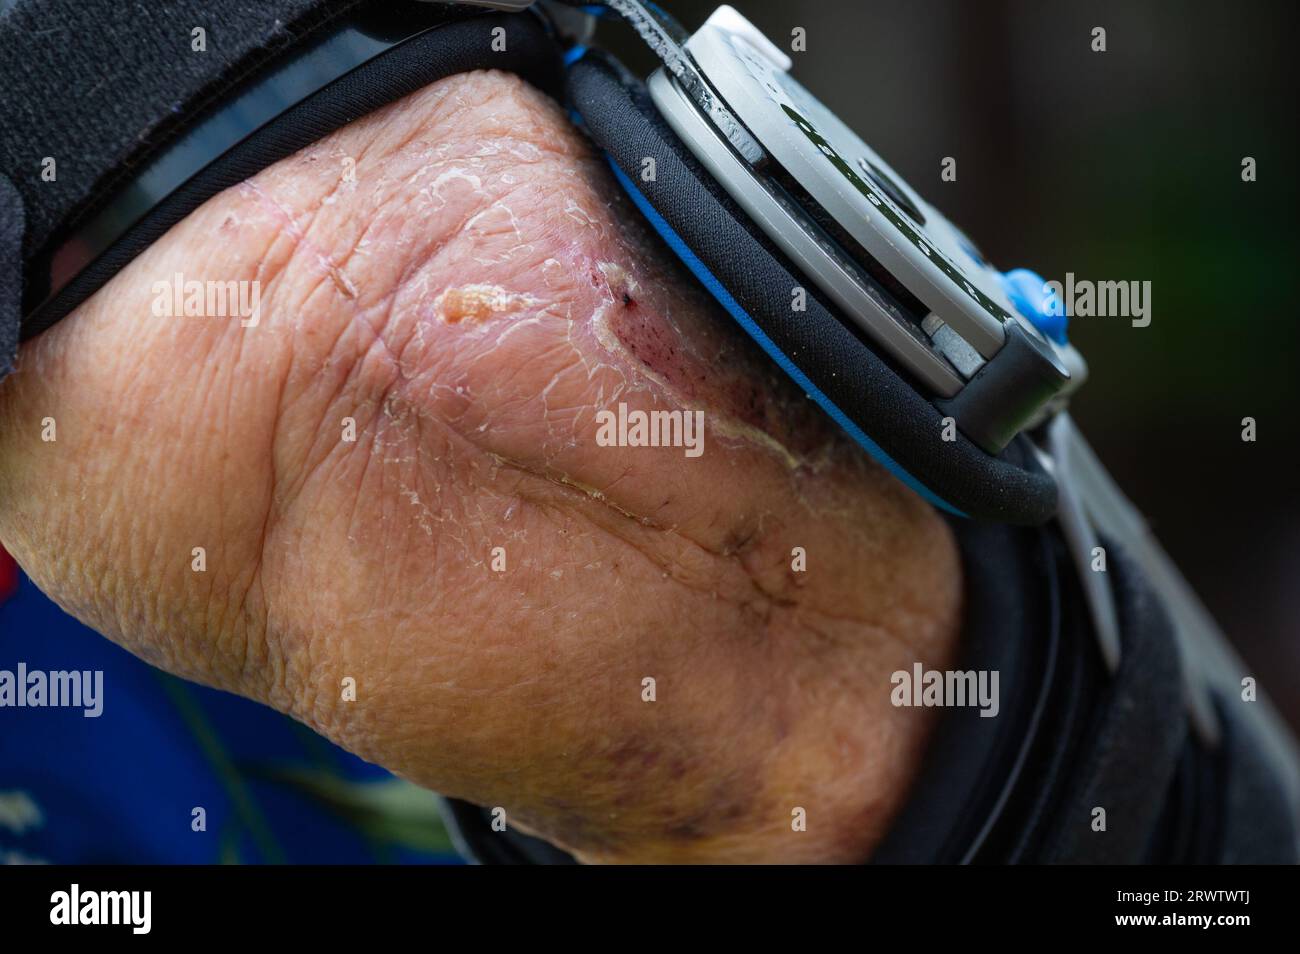 Woman wearing Post-Op Elbow Brace after breaking her elbow & having surgery. Closeup showing scar. Stock Photo